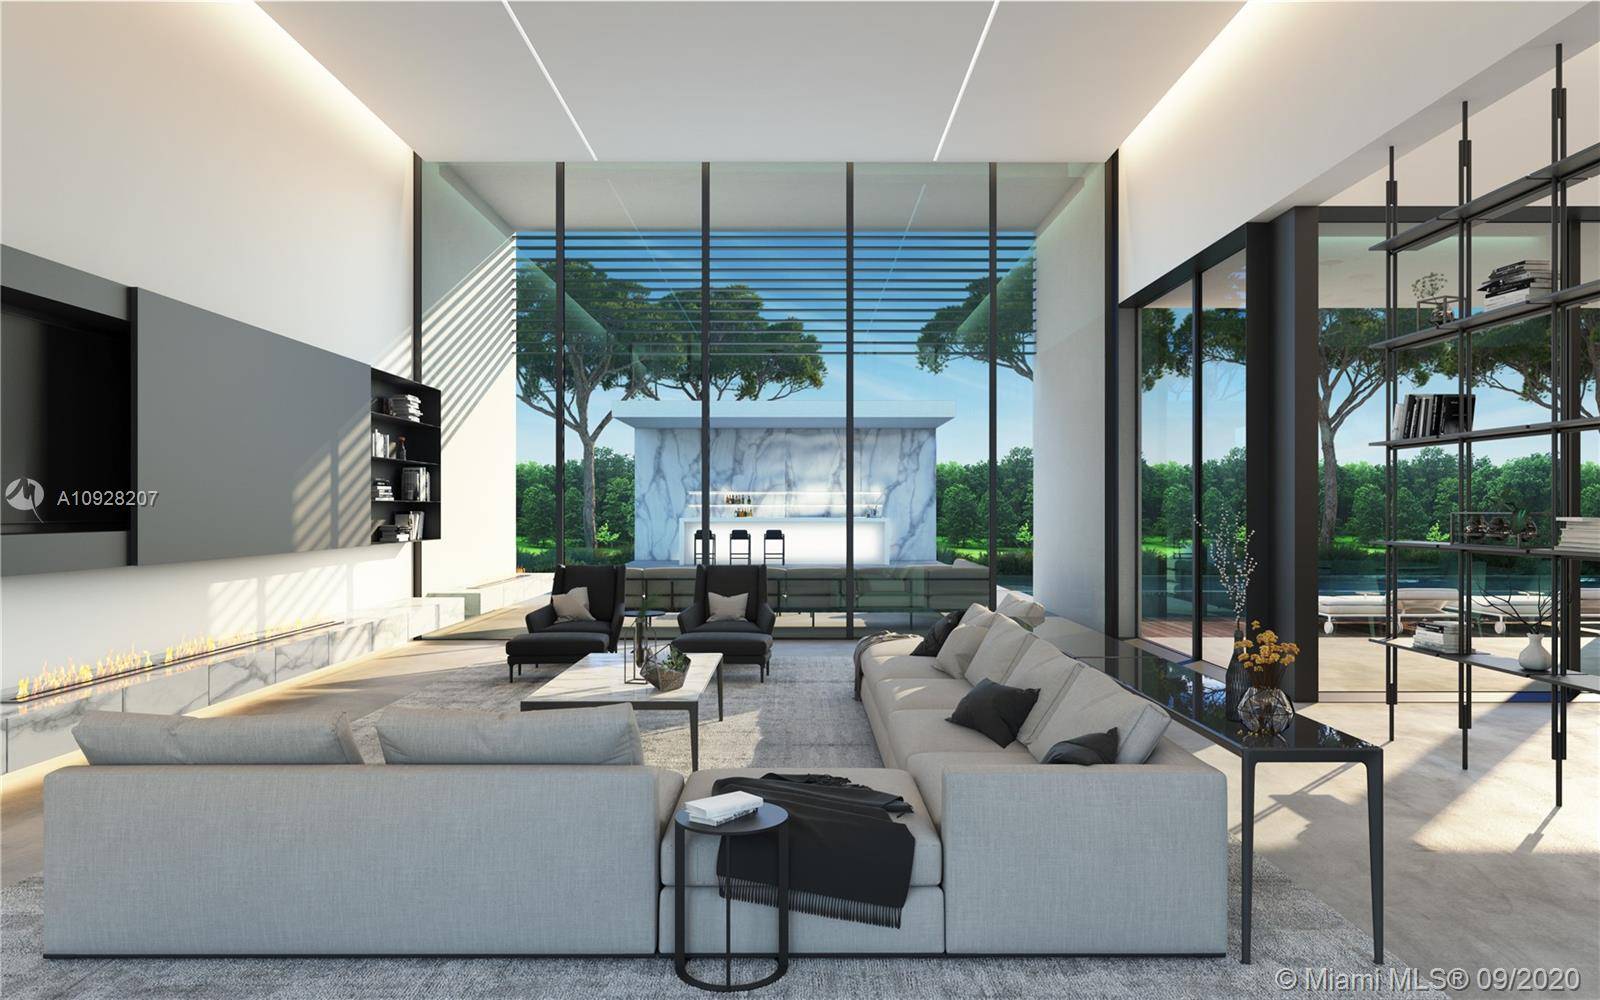 Estate A is a stunning contemporary villa being developed in the ultra luxury private gated community of AKAI Estates.